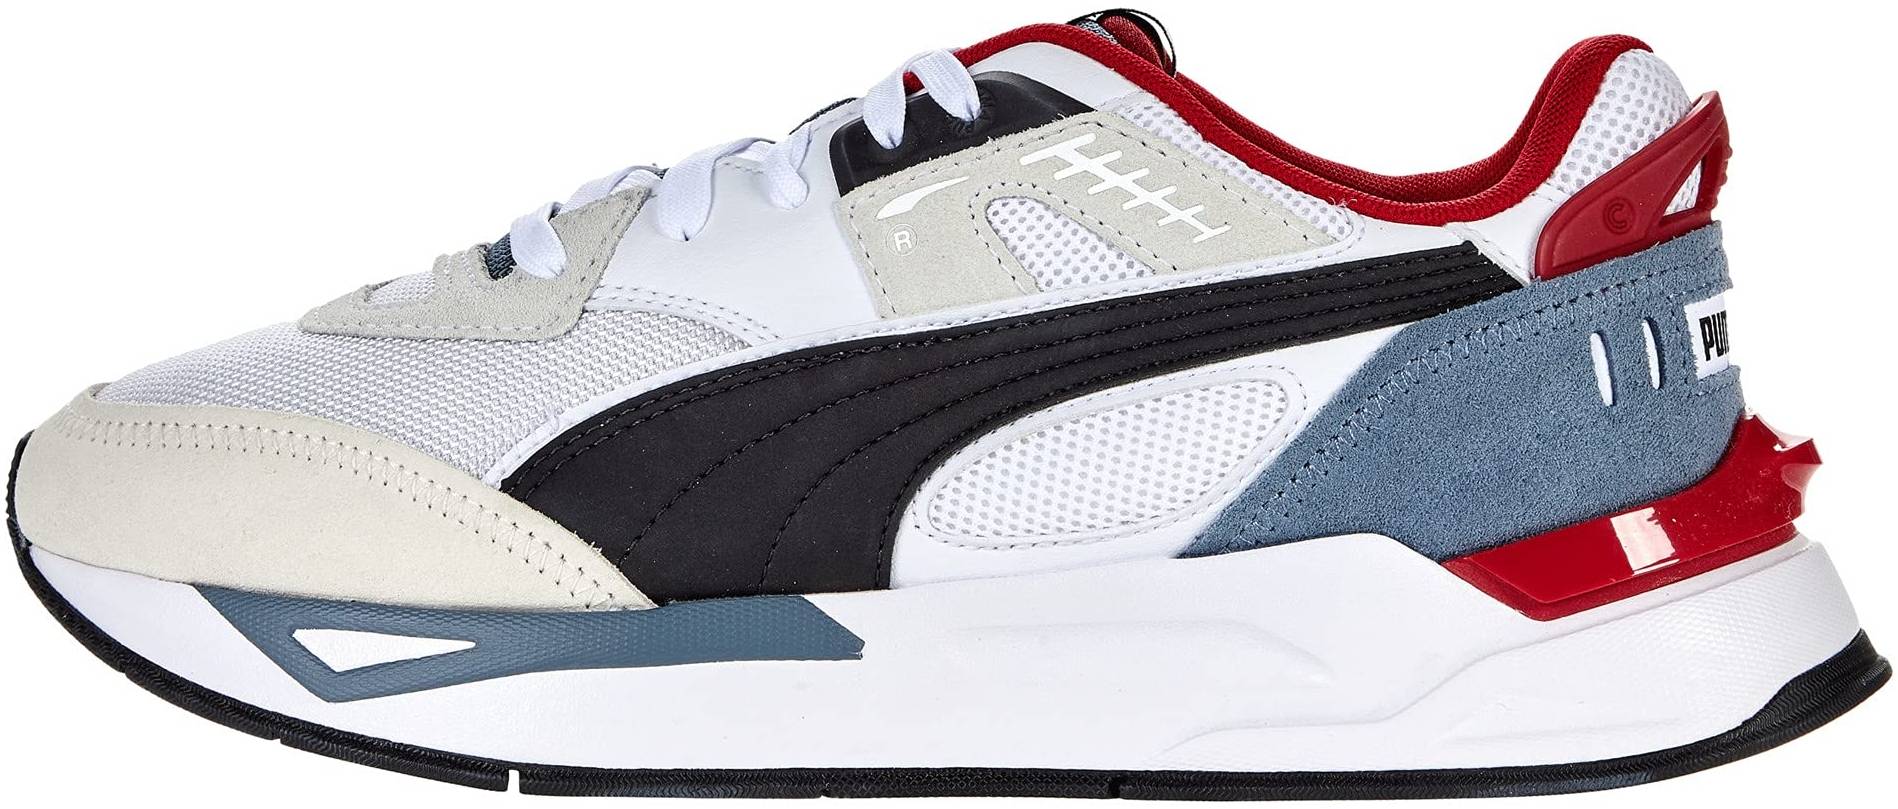 suit haze Solve PUMA Mirage Sport Remix sneakers in 9 colors (only $60) | RunRepeat